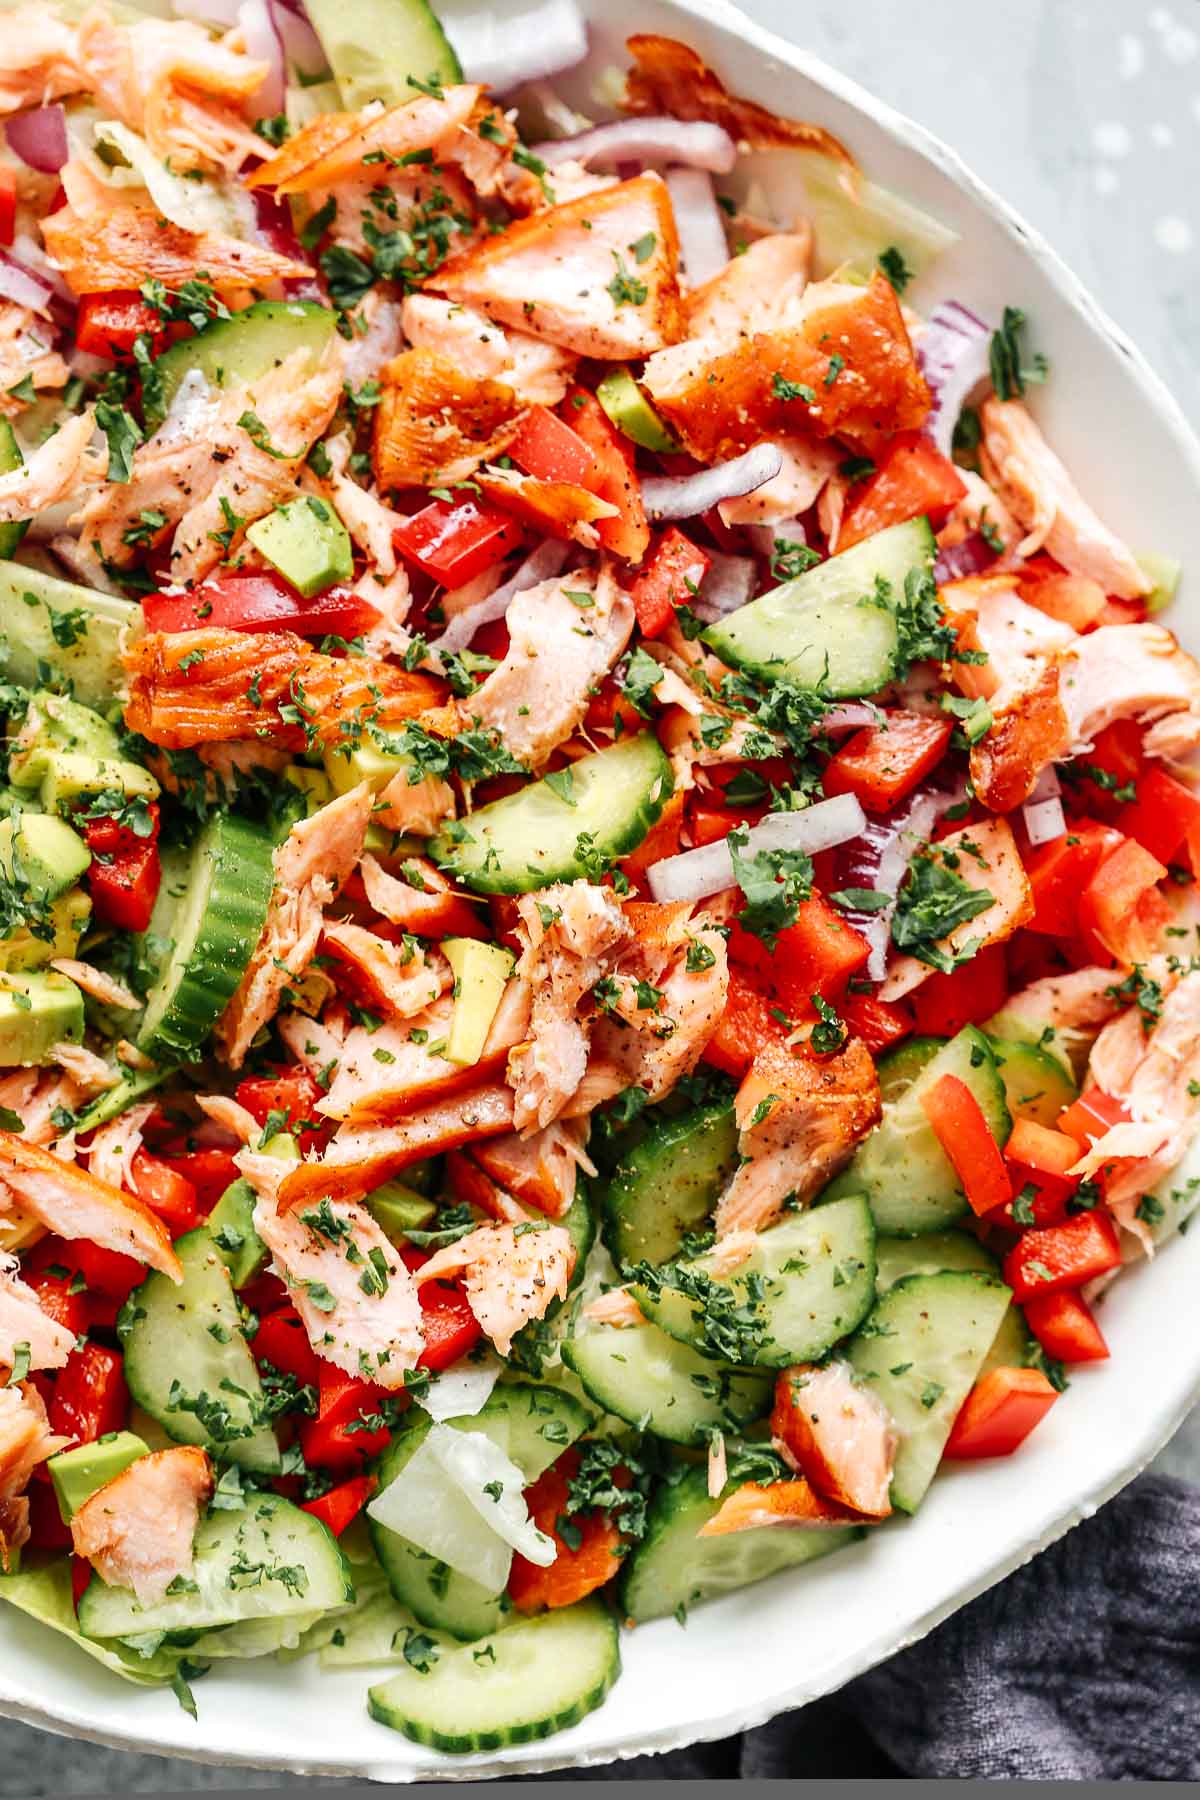 main dish salad with chopped vegetables and fish